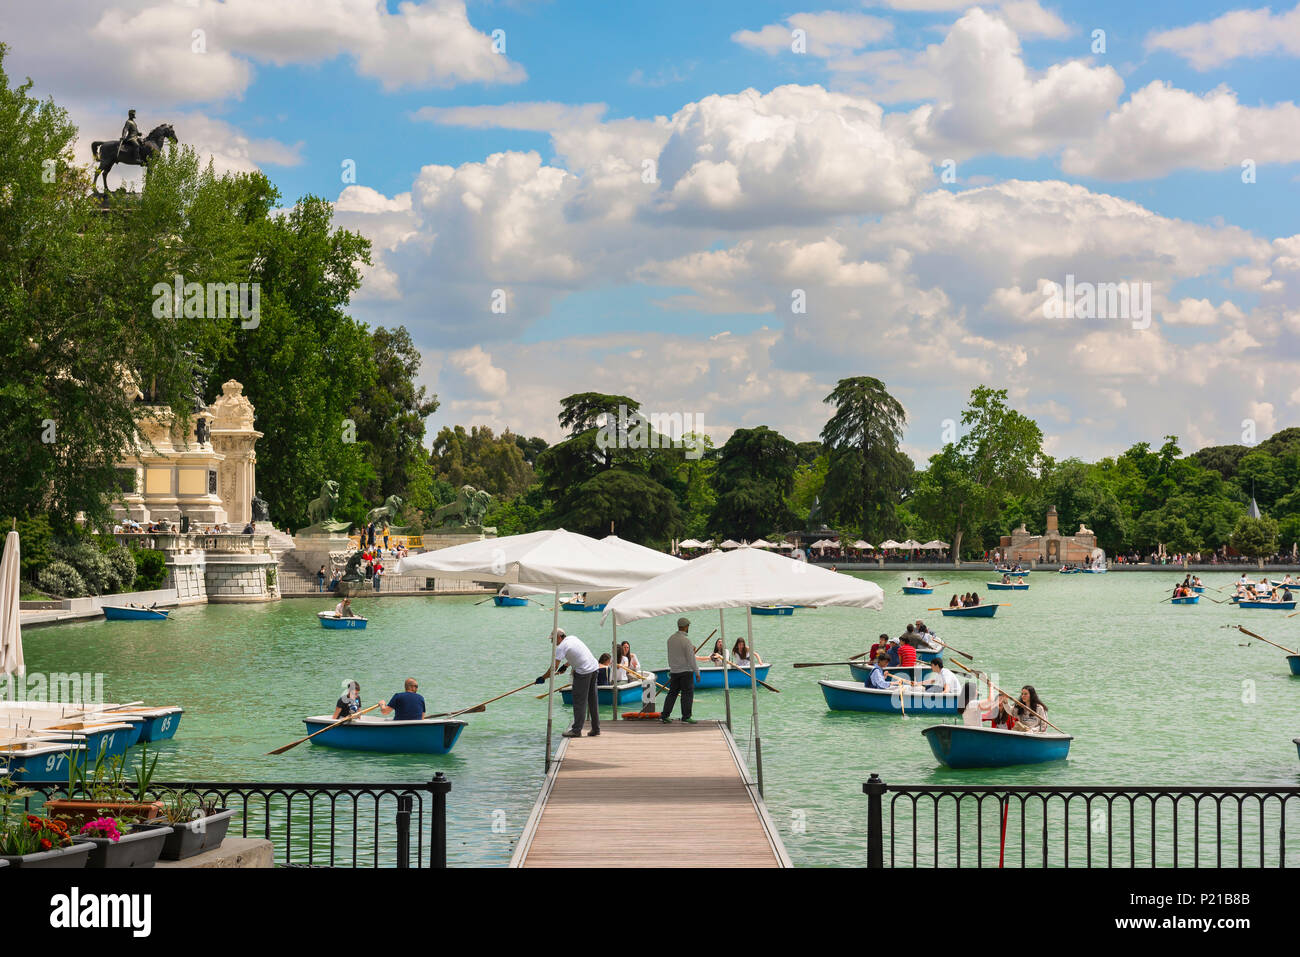 Madrid lake Retiro, view on a summer afternoon of people enjoying boat rides on the Estanque (lake) in the Parque del Retiro in central Madrid, Spain Stock Photo